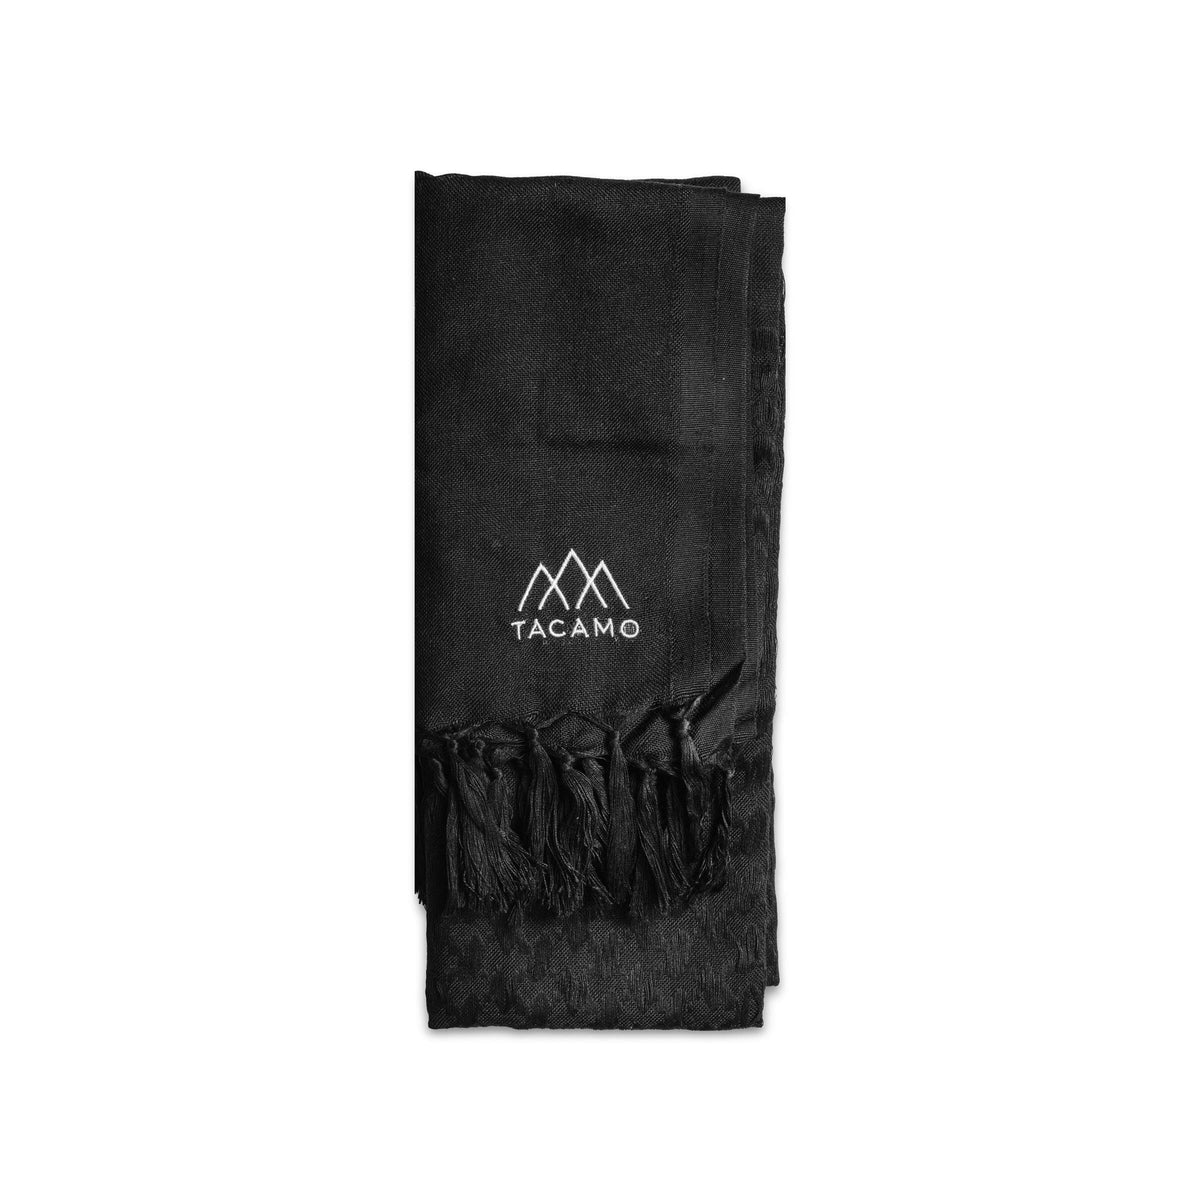 Tactical Shemagh Scarf - Black Folded